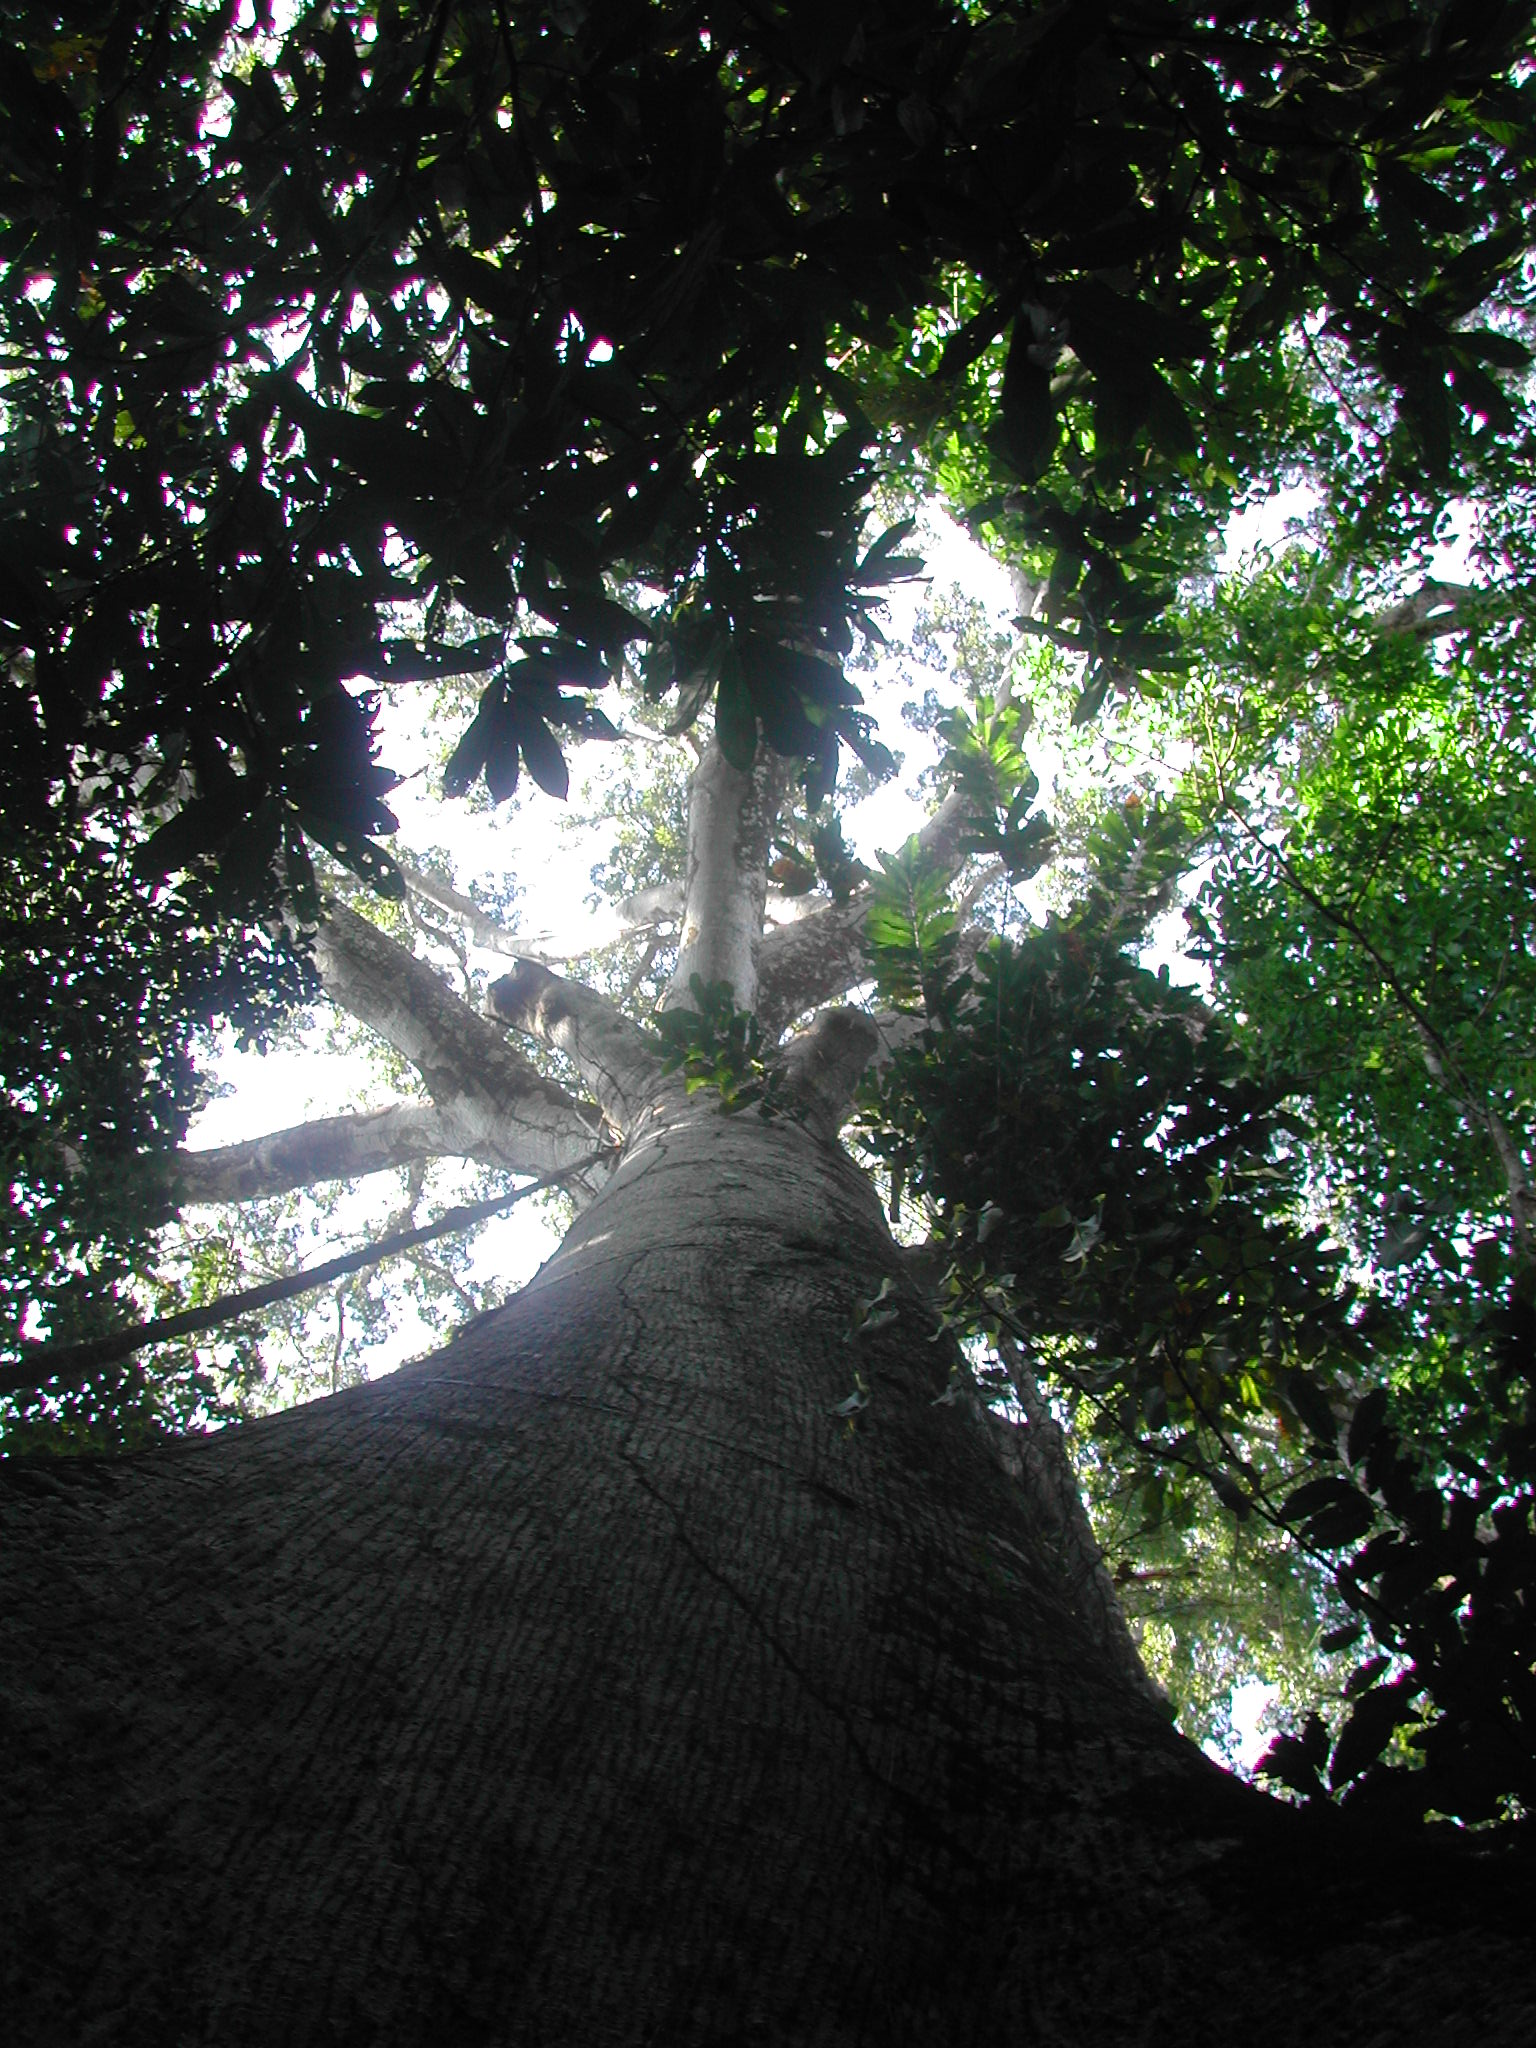 An image looking up at a Ceiba Petandra tree from the base of its trunk. Some sunlight can be seen through the canopy.